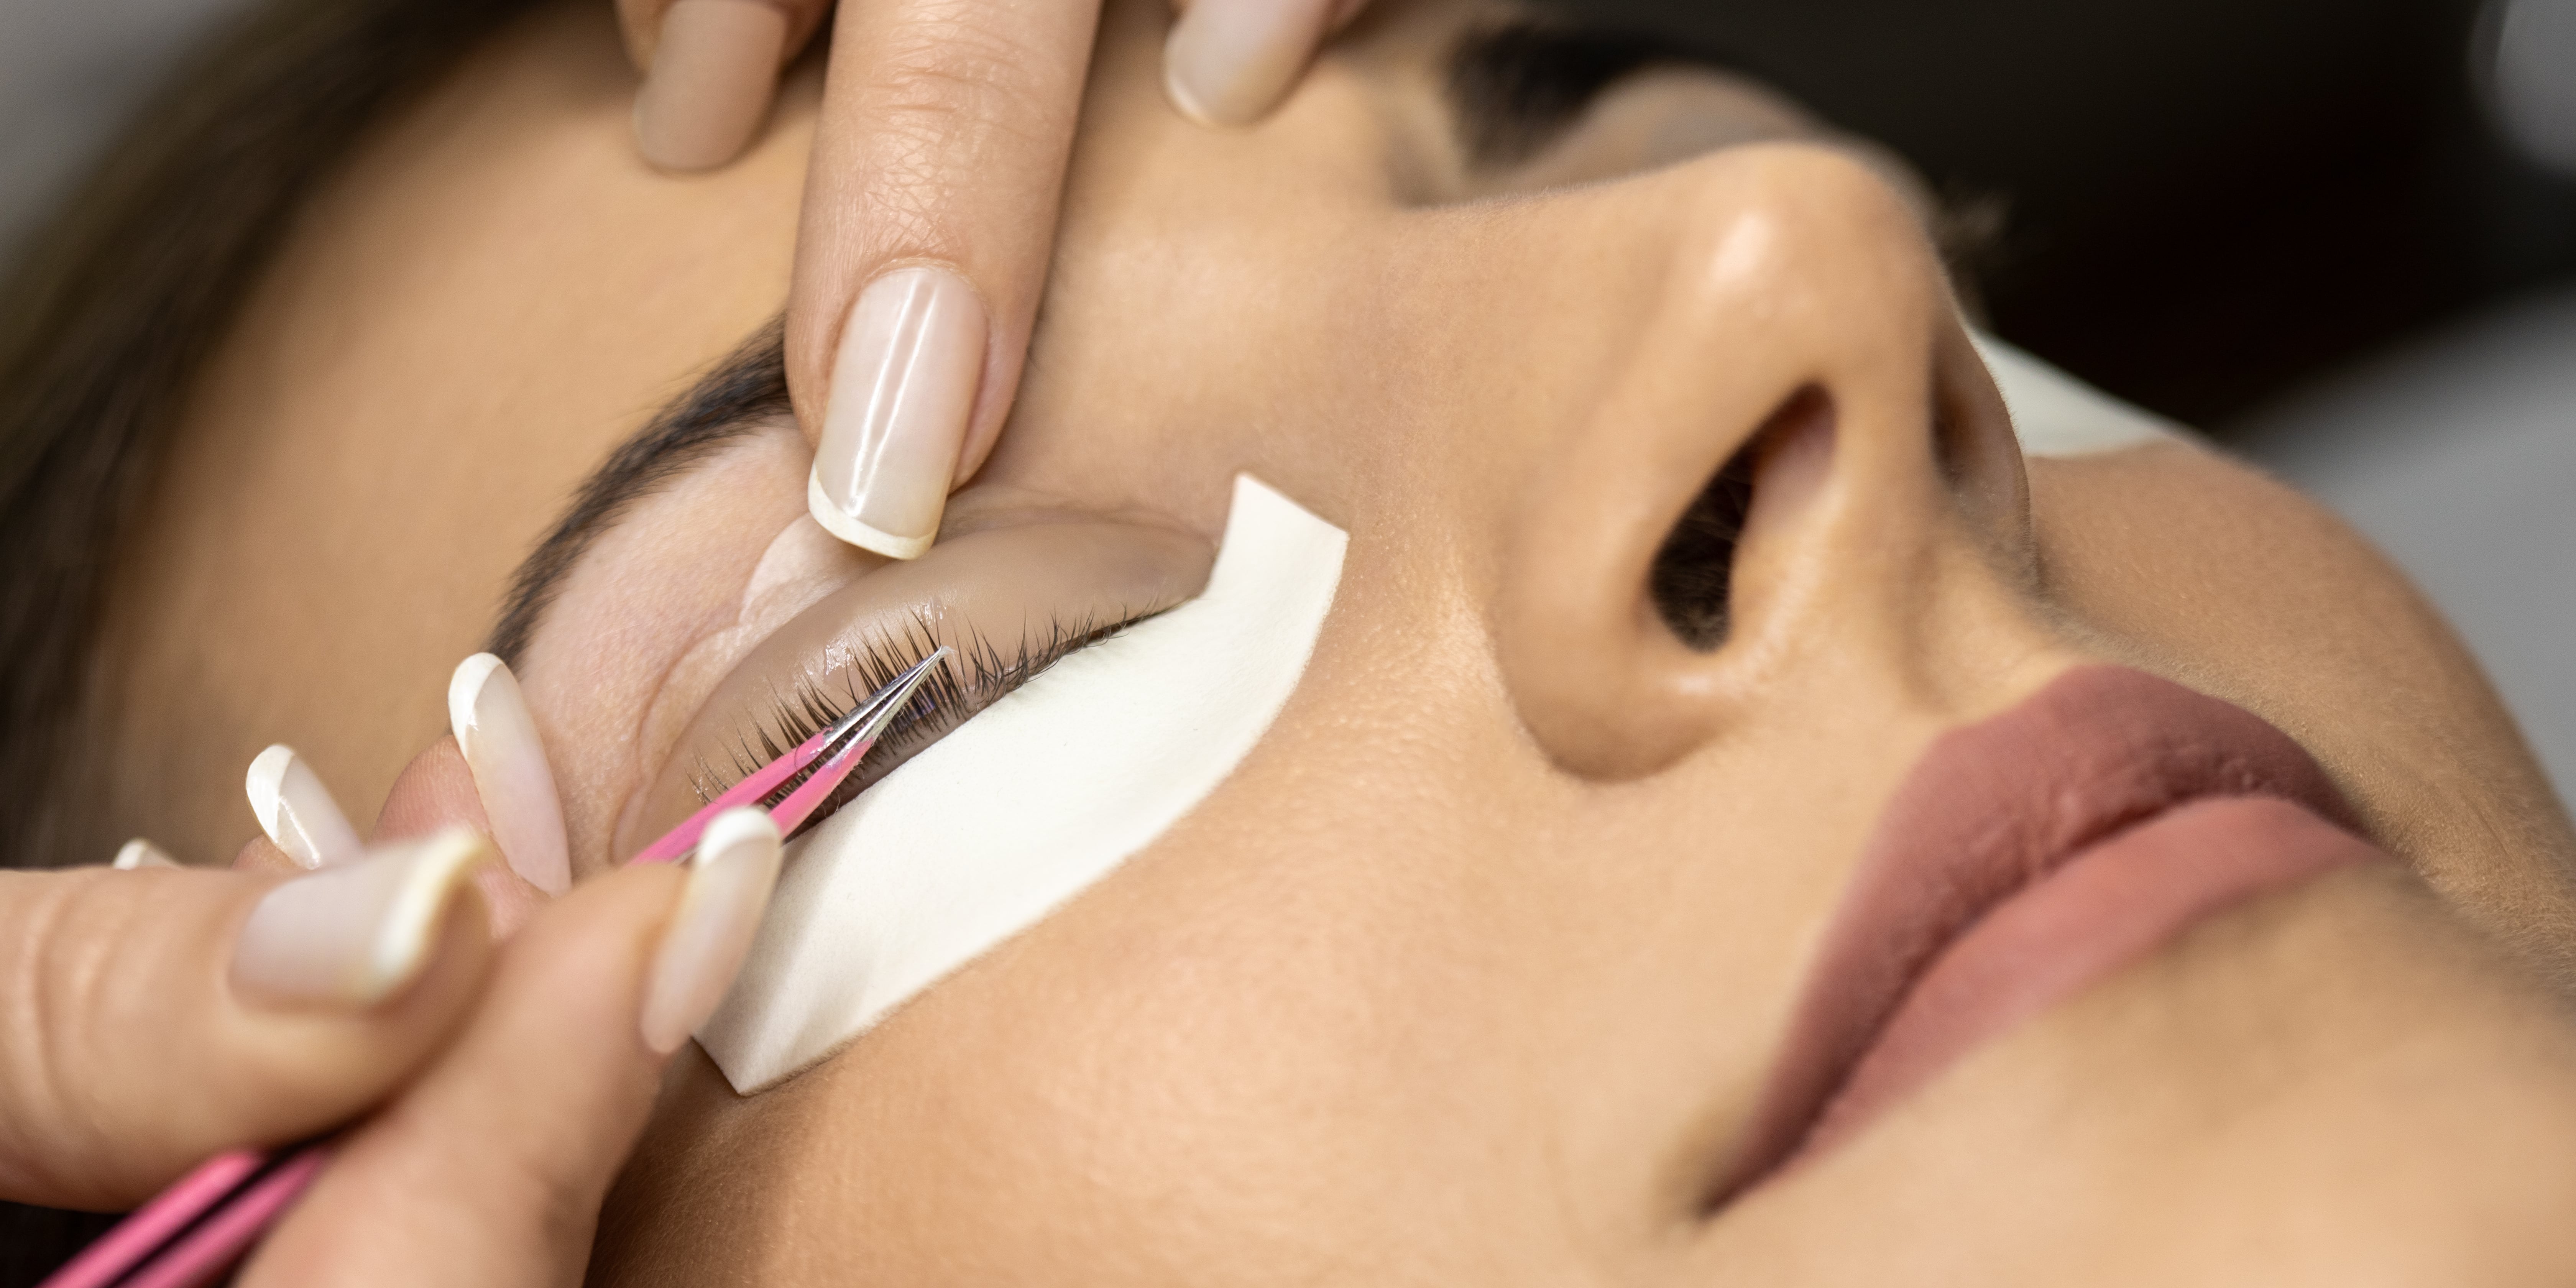 Eyelash Extensions and Eyelash Lifts — Should You Get Them For